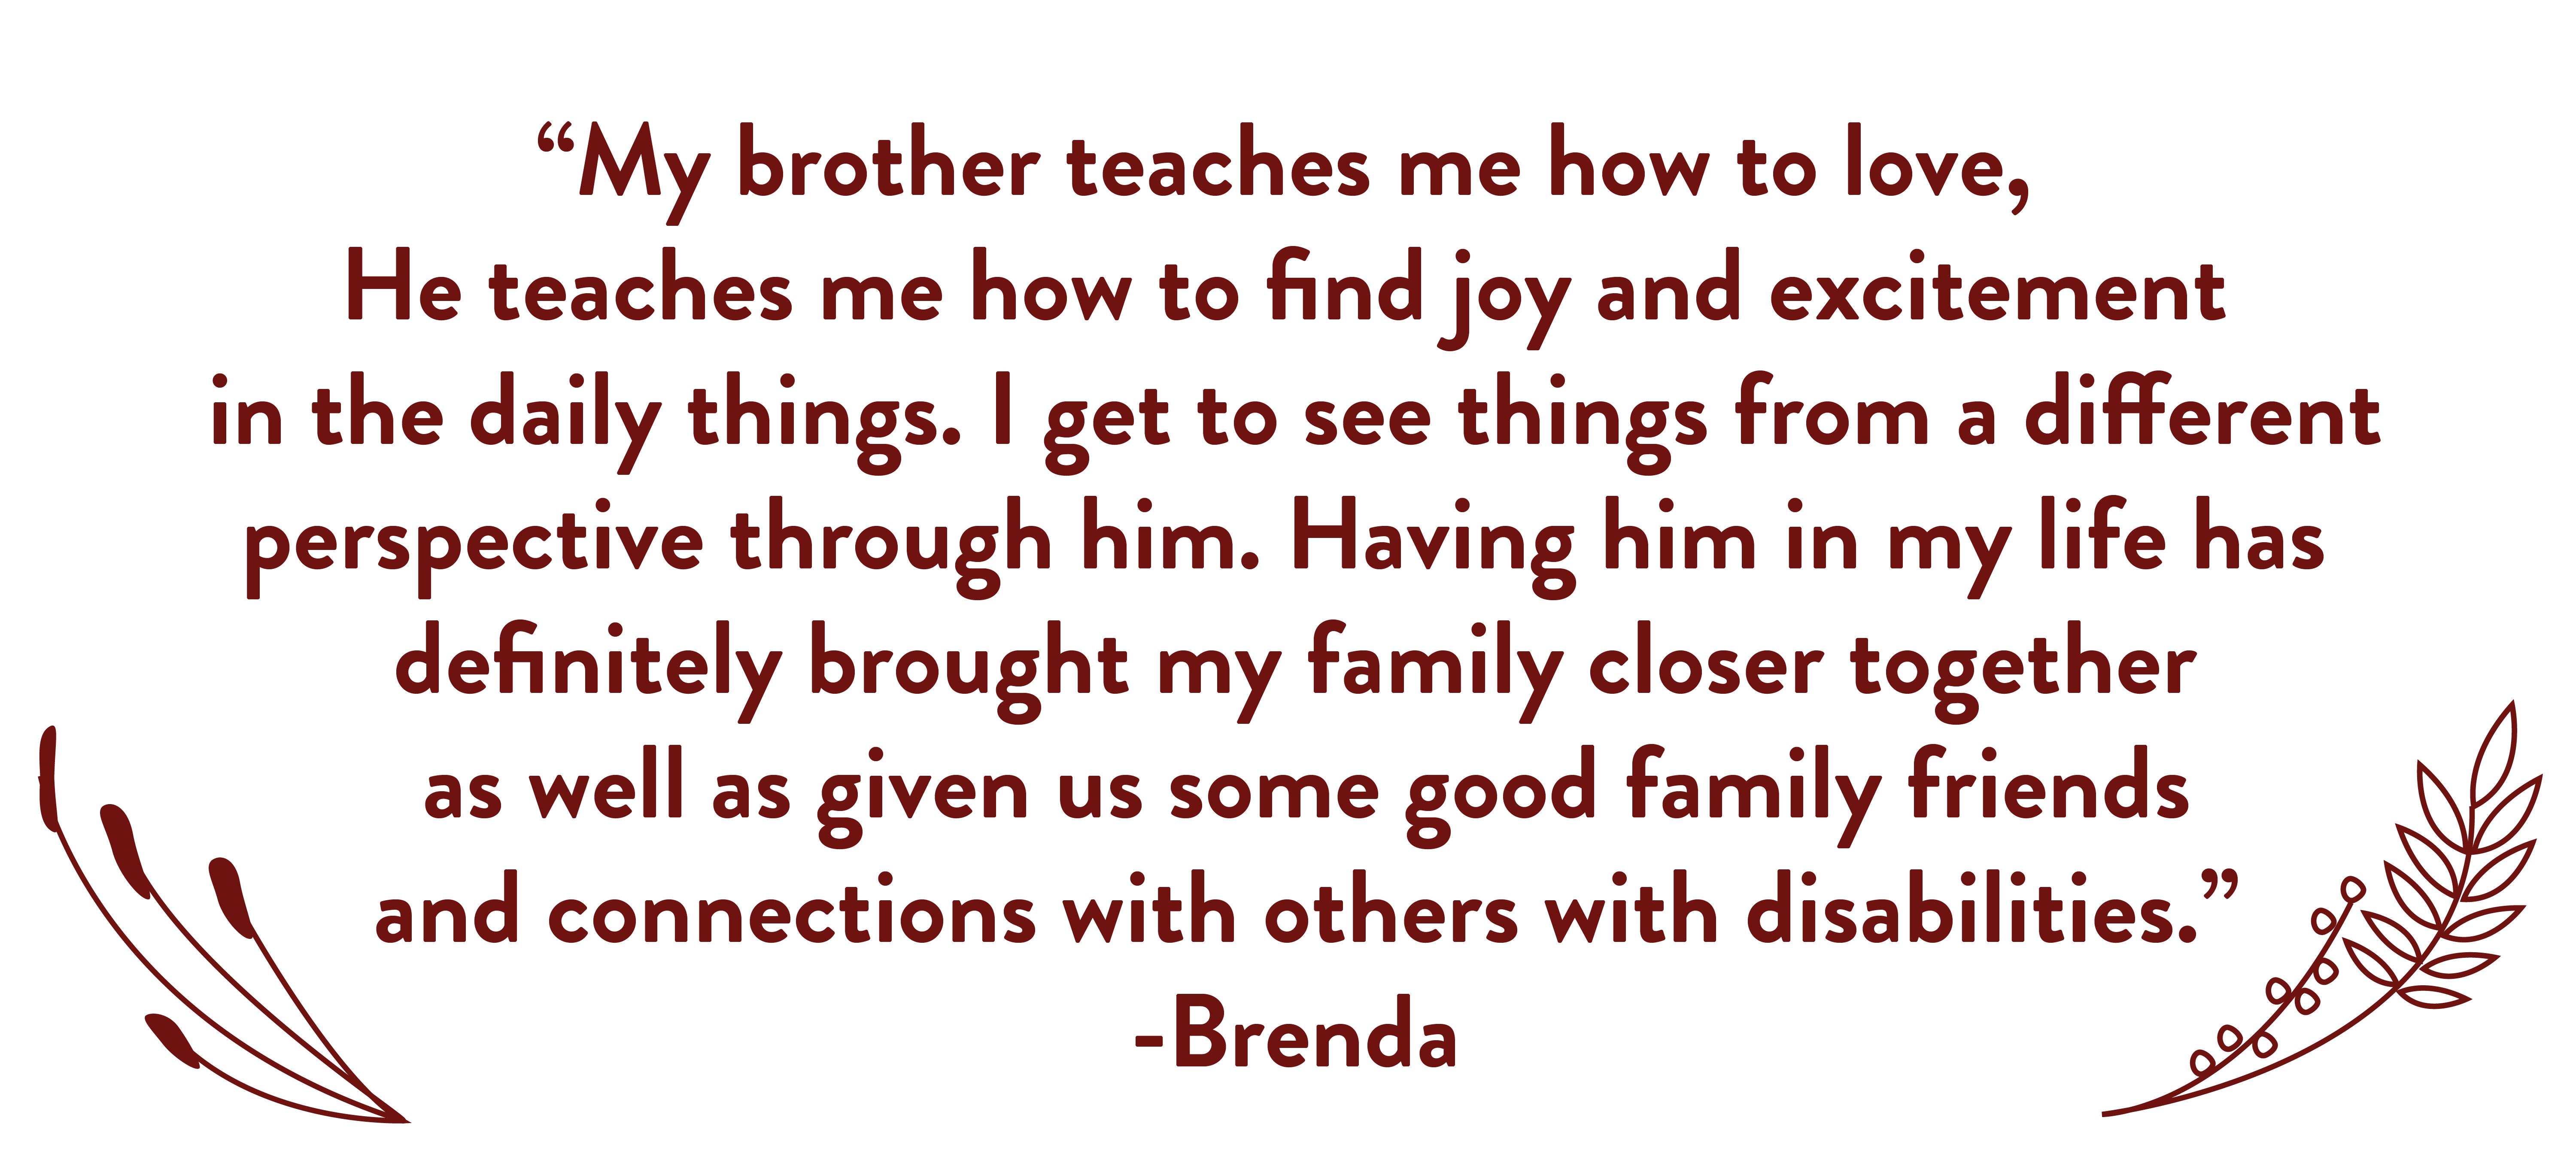 Quote from Brenda.